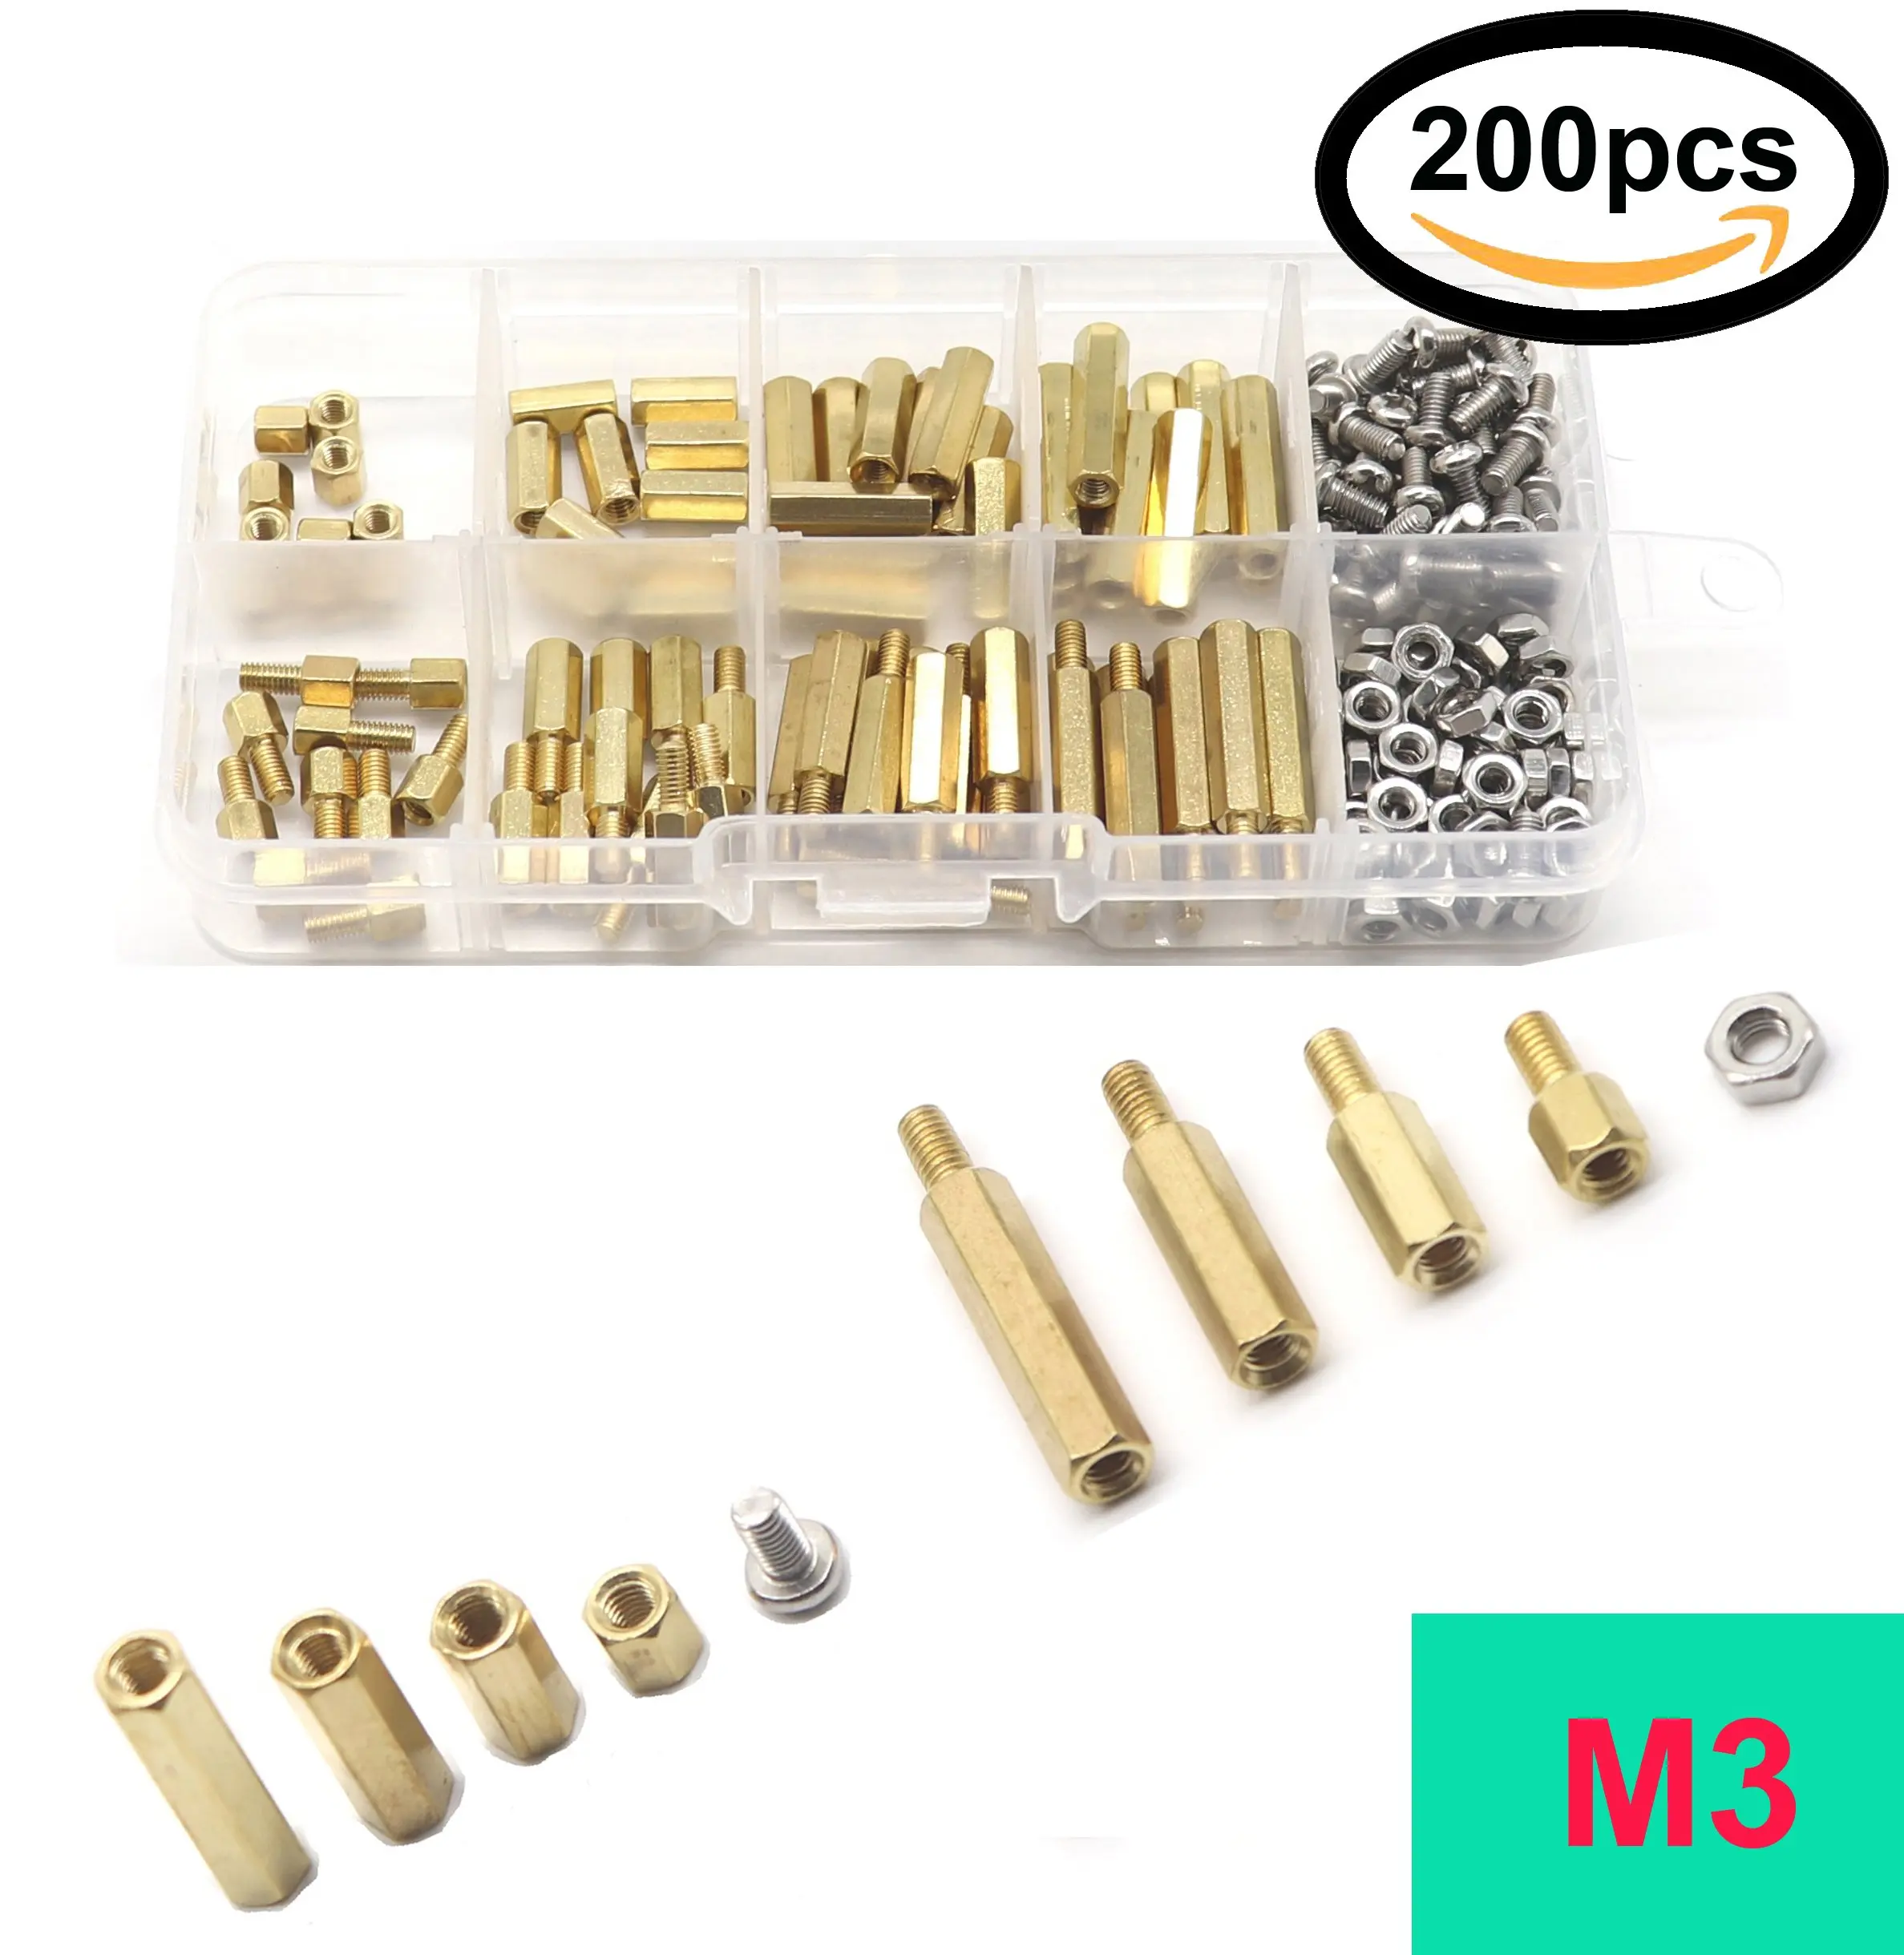 304 Stainless Steel Machine Screws Nuts binifiMux 540Pcs M2 Copper Brass Round Standoff Spacers Screw Nuts Assortment Kit,Male Female